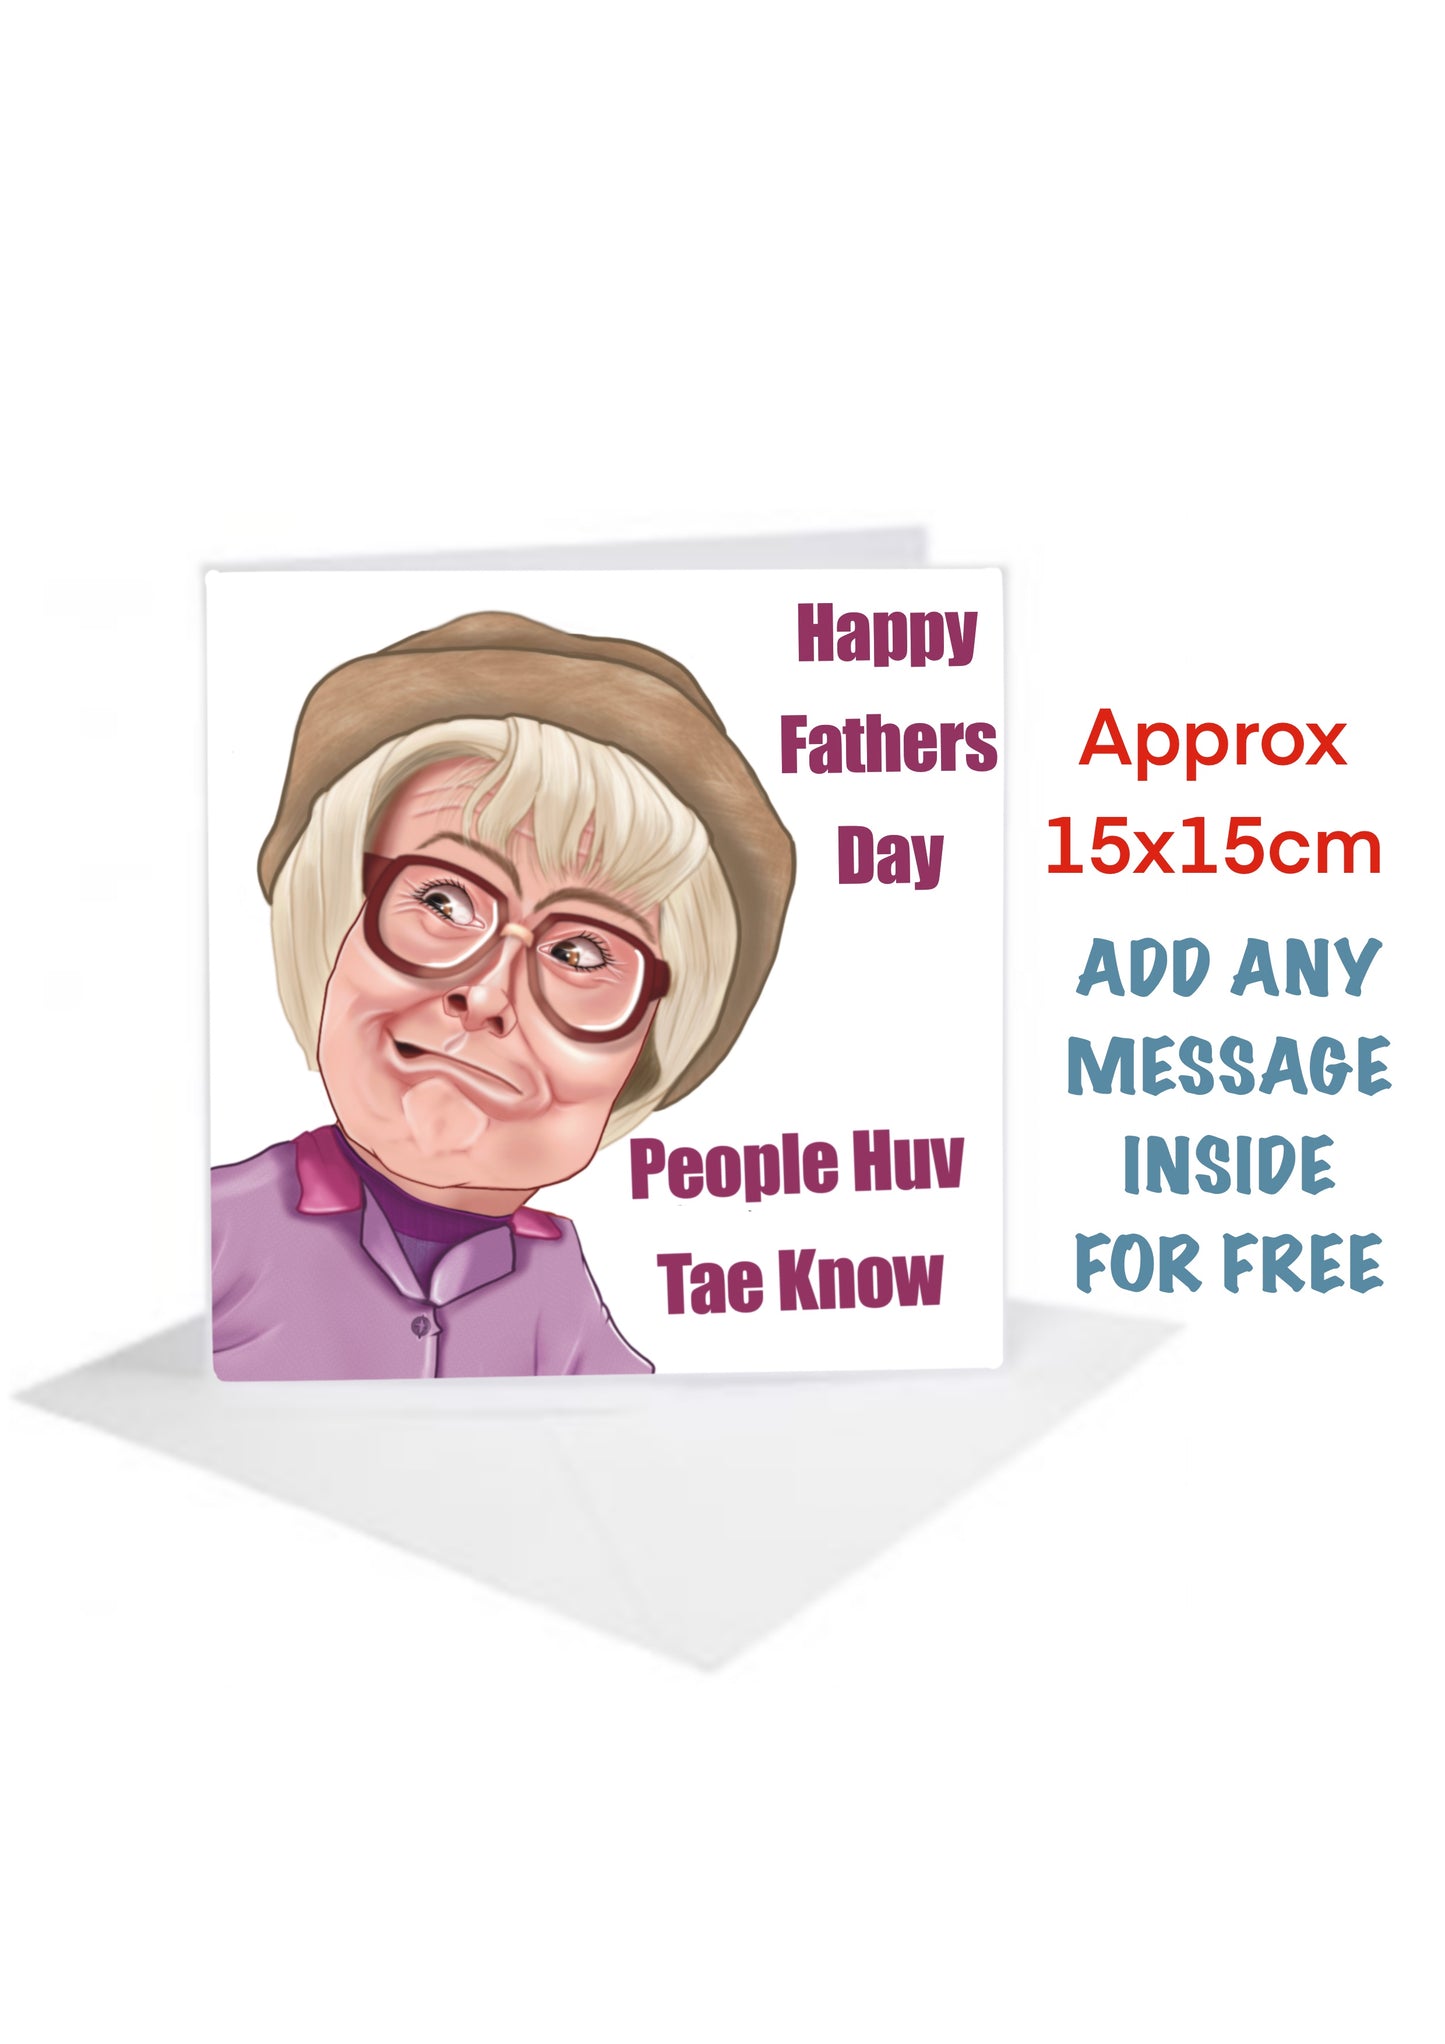 Happy Fathers Day Cards-Cards Still Game Isa Auld Pals